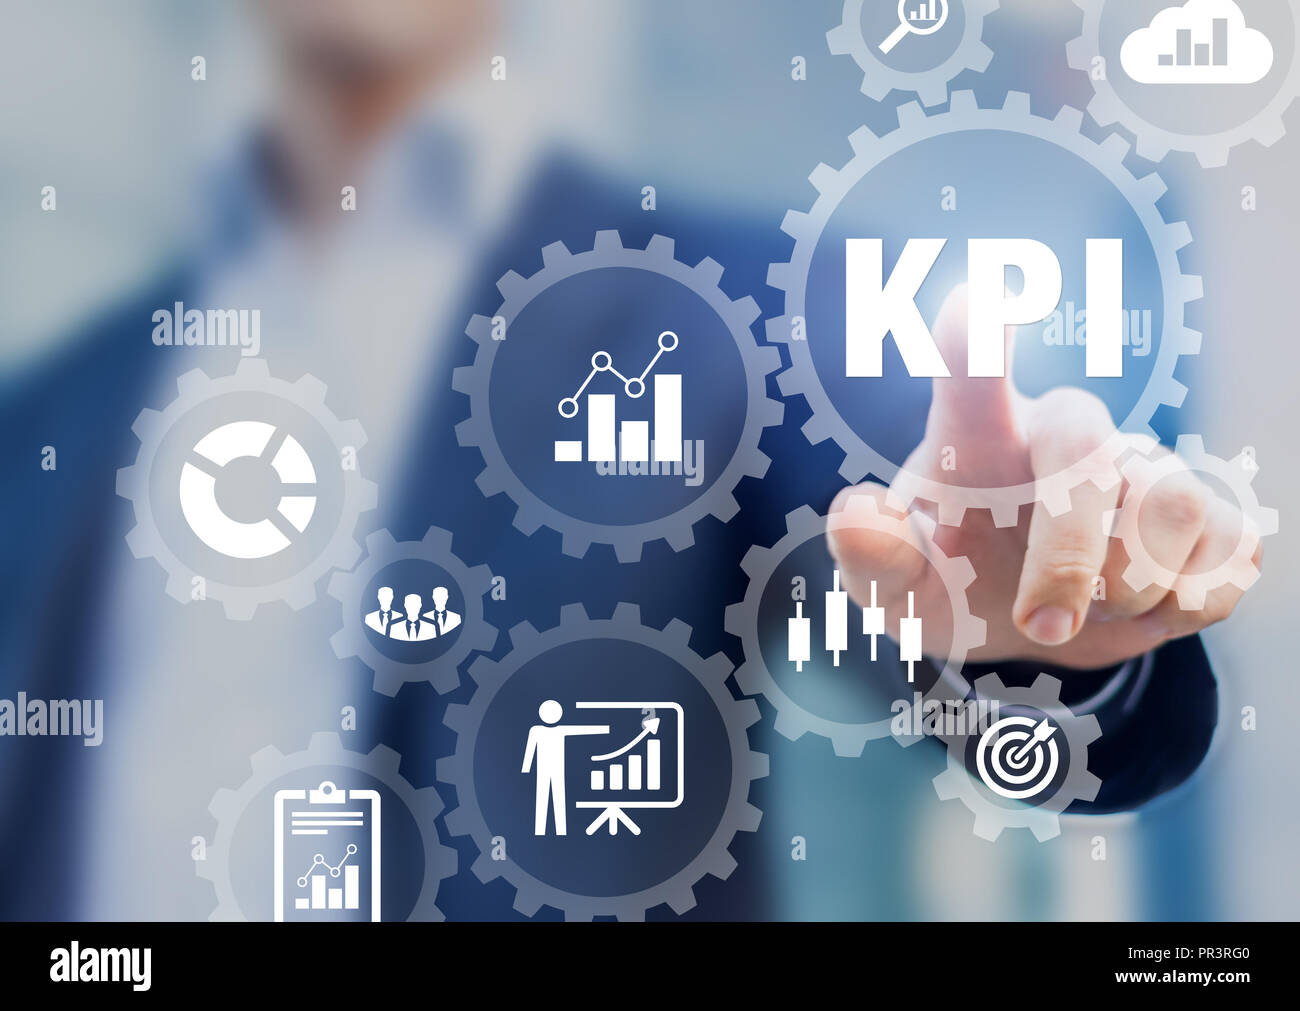 KPI Key Performance Indicators presentation, business development strategy, metrics measuring production, sales, efficiency against planned targeted a Stock Photo